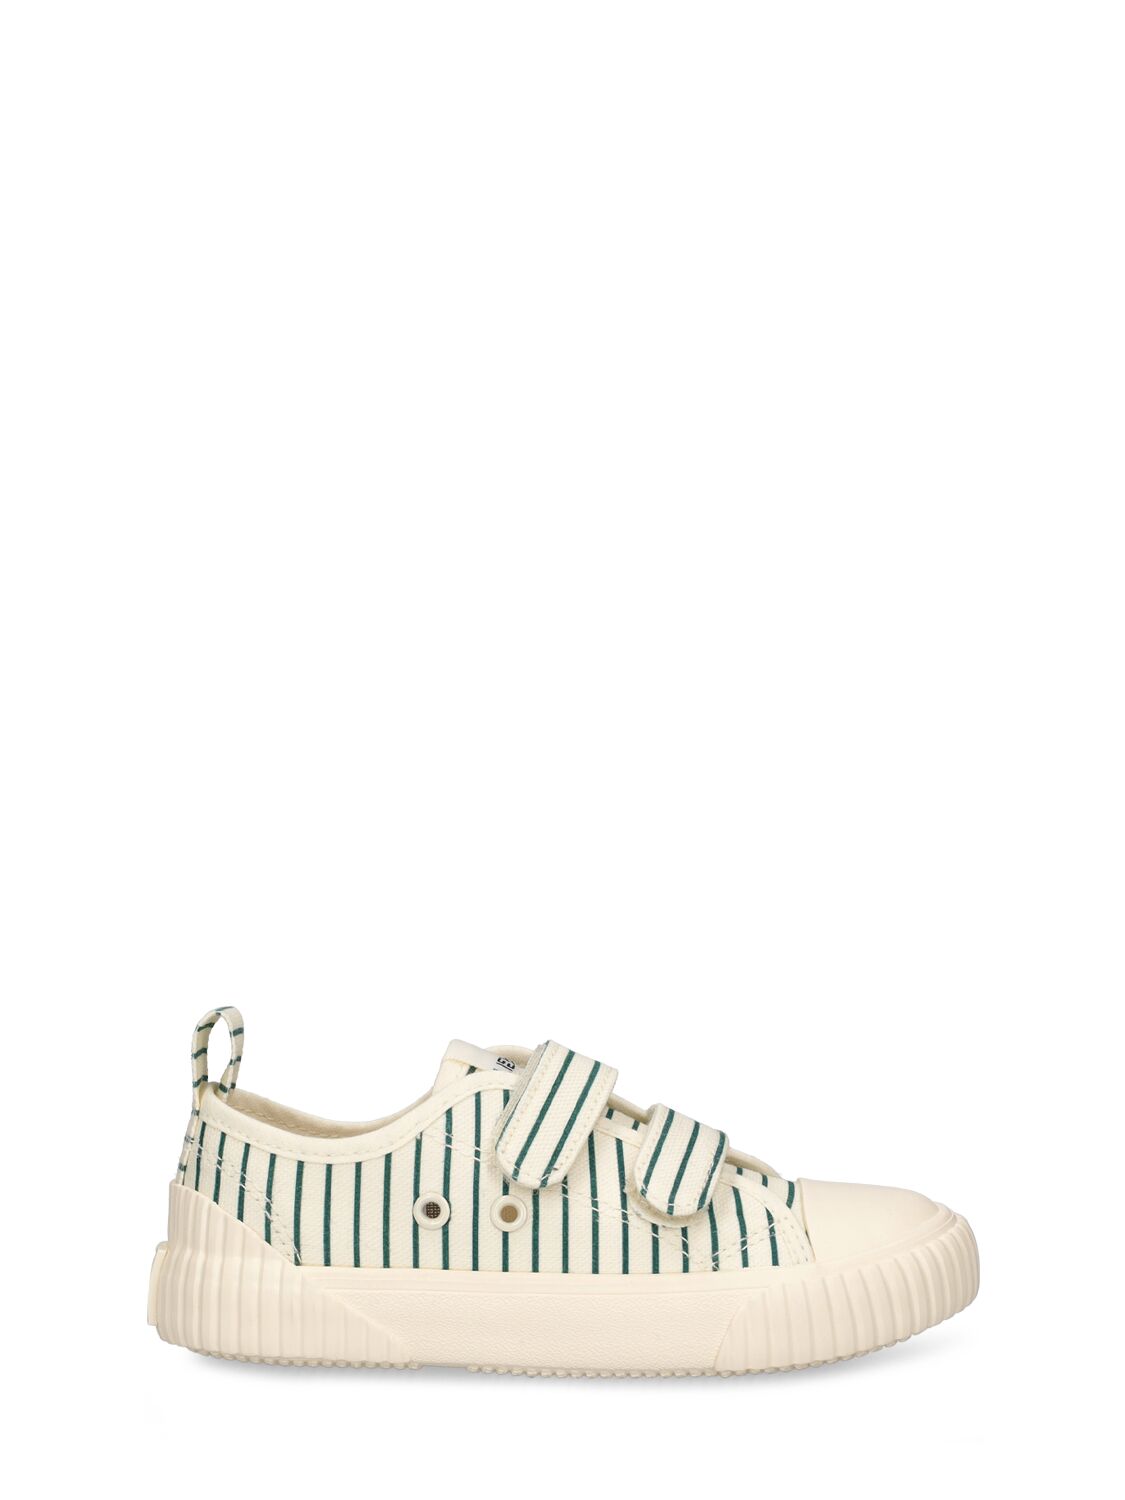 Liewood Kids' Handmade Cotton Canvas Strap Sneakers In Green,white